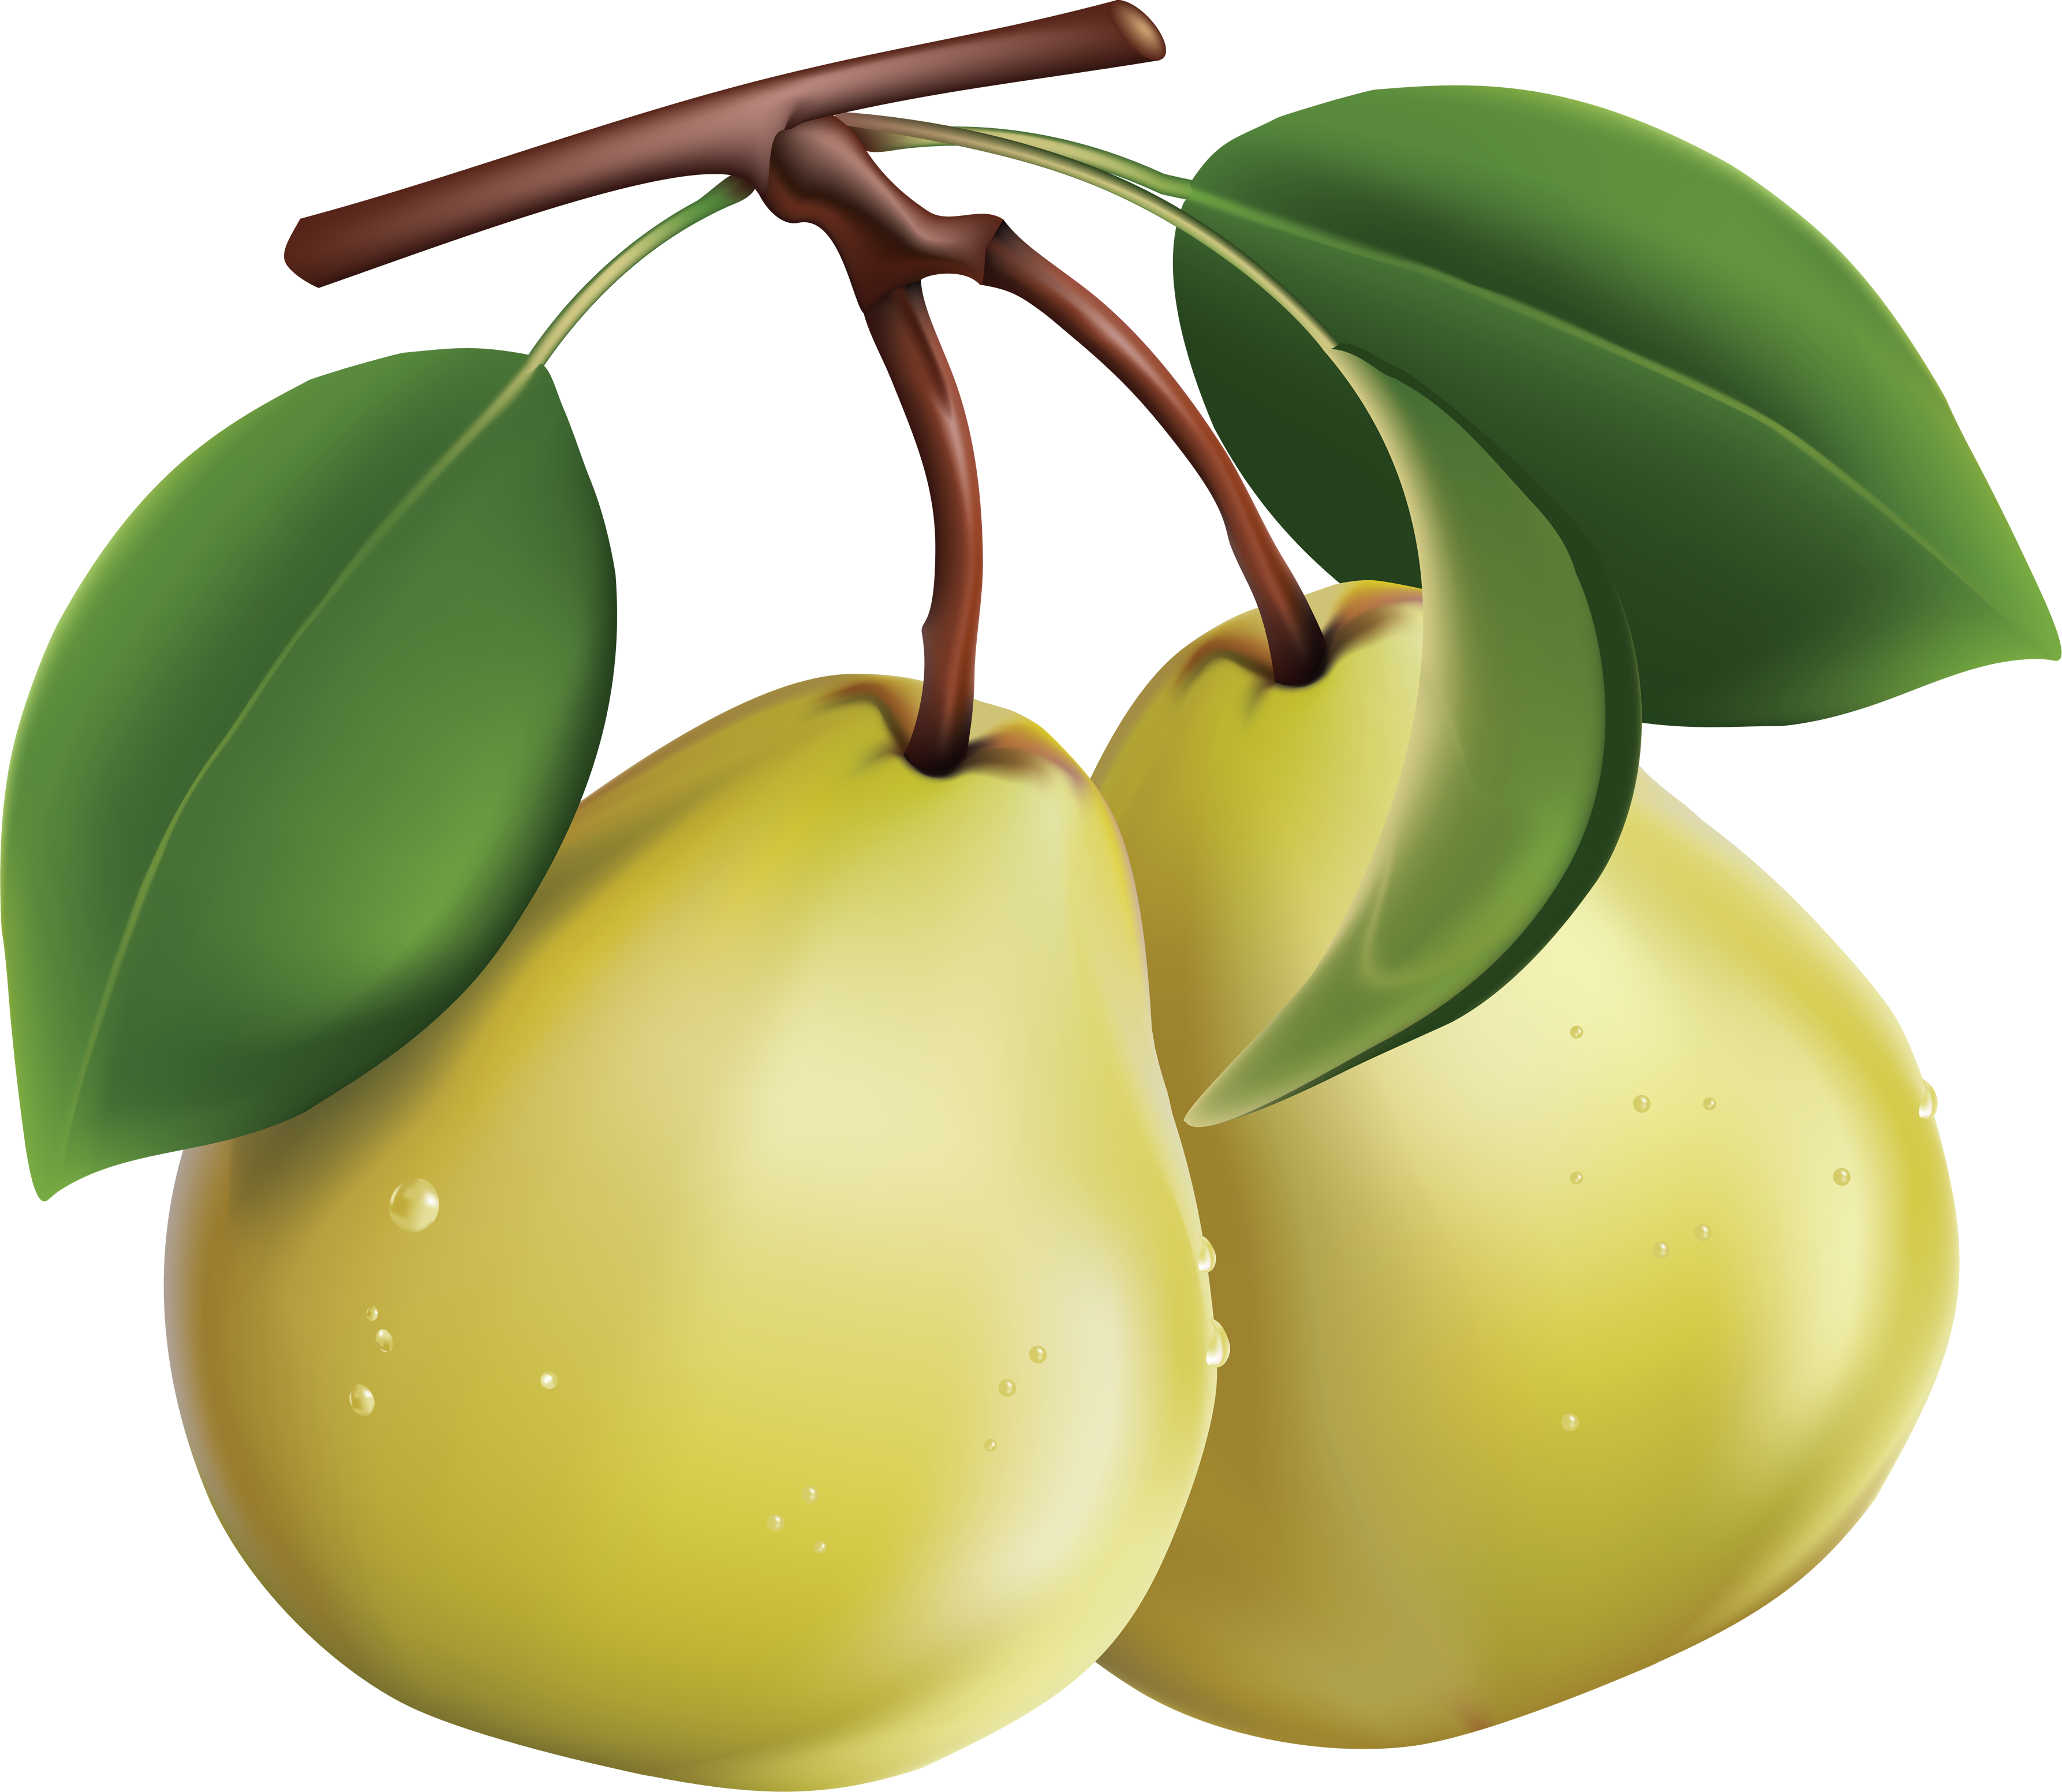 Yellow Pears With Leaves Vector